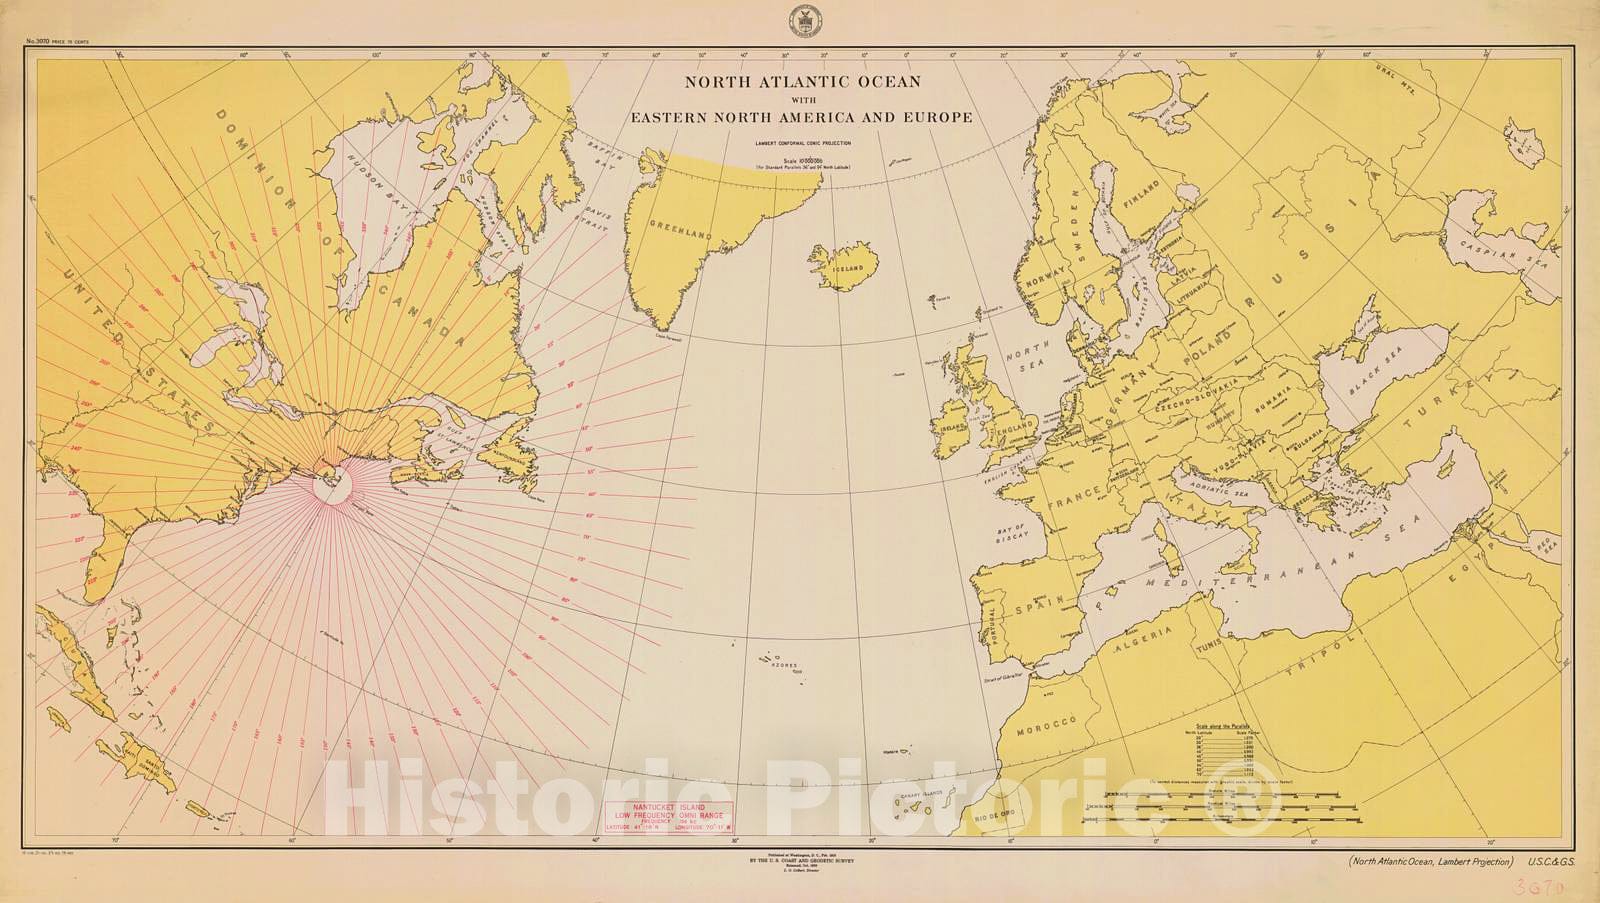 Historic Nautical Map - North Atlantic Ocean With Eastern North America And Europe, 1918 NOAA Base Historic Nautical Map - Vintage Wall Art